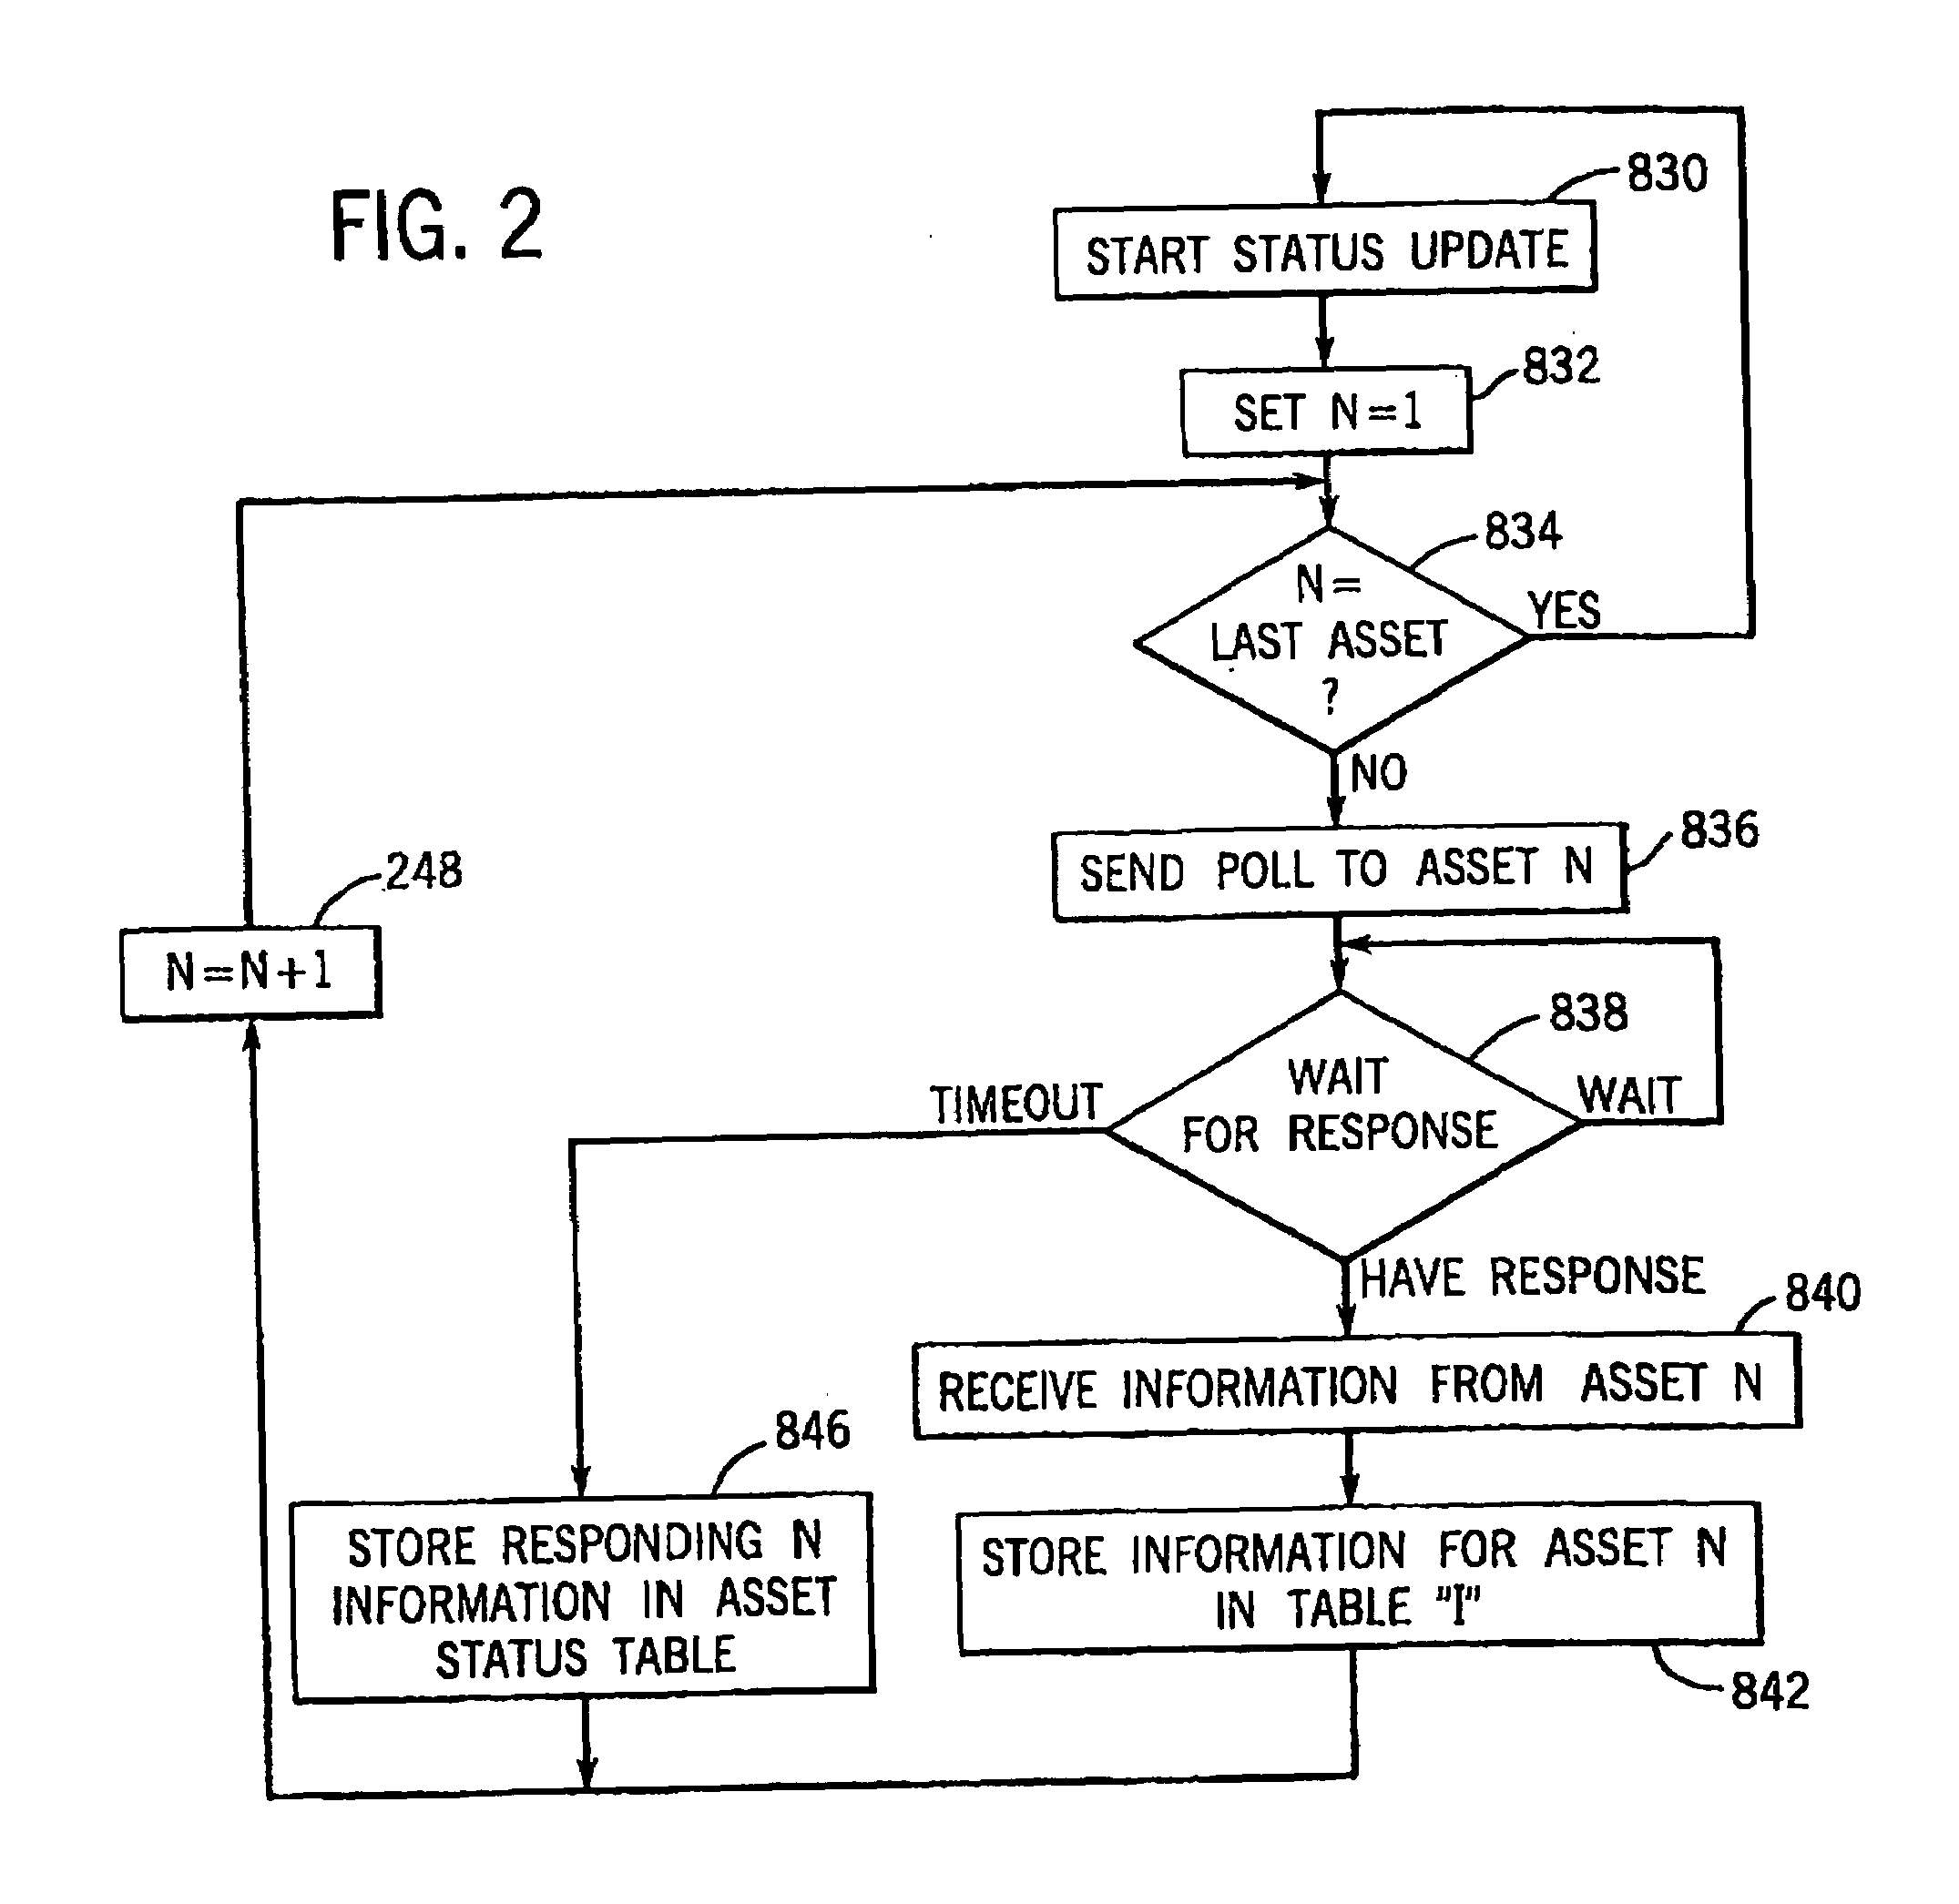 Apparatus and method of collecting and distributing event data to strategic security personnel and response vehicles